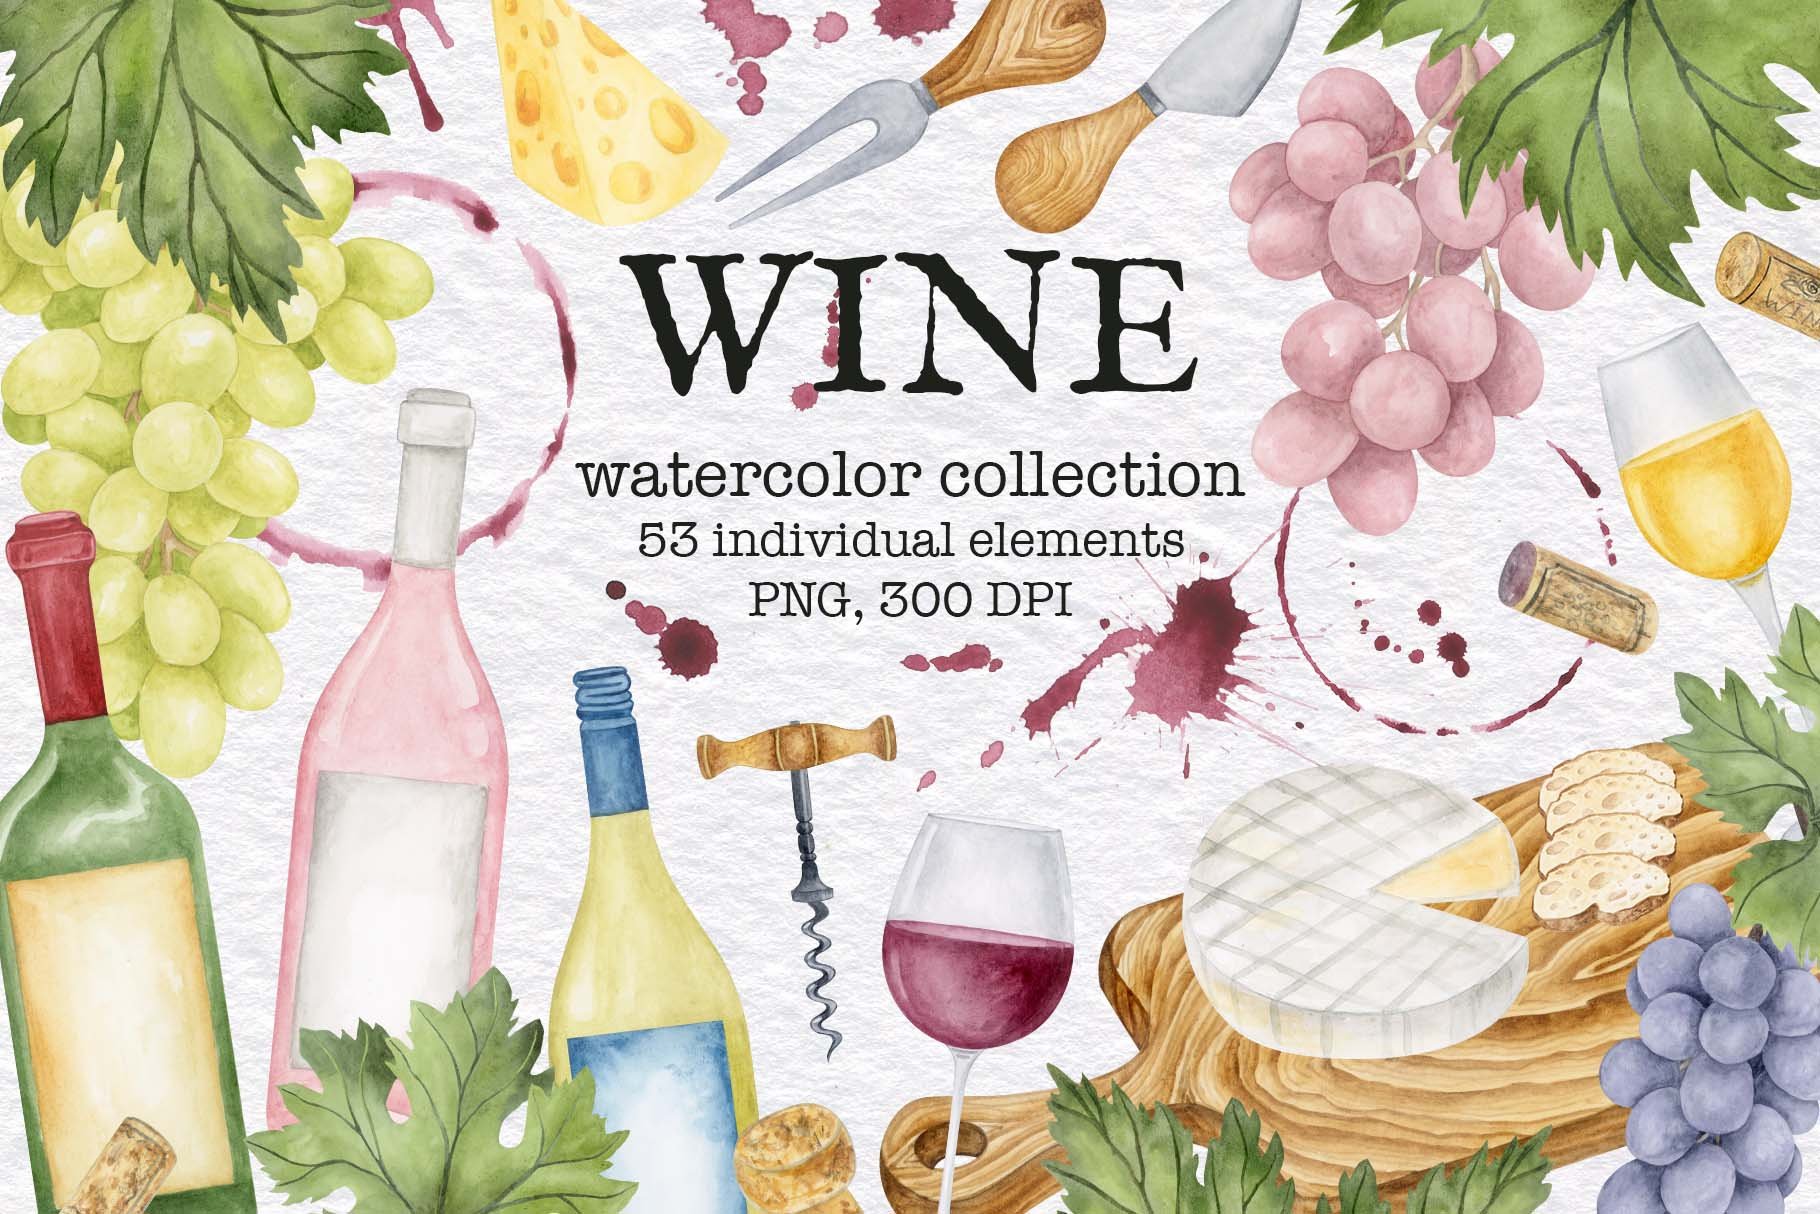 Watercolor Wine and Cheese set cover image.